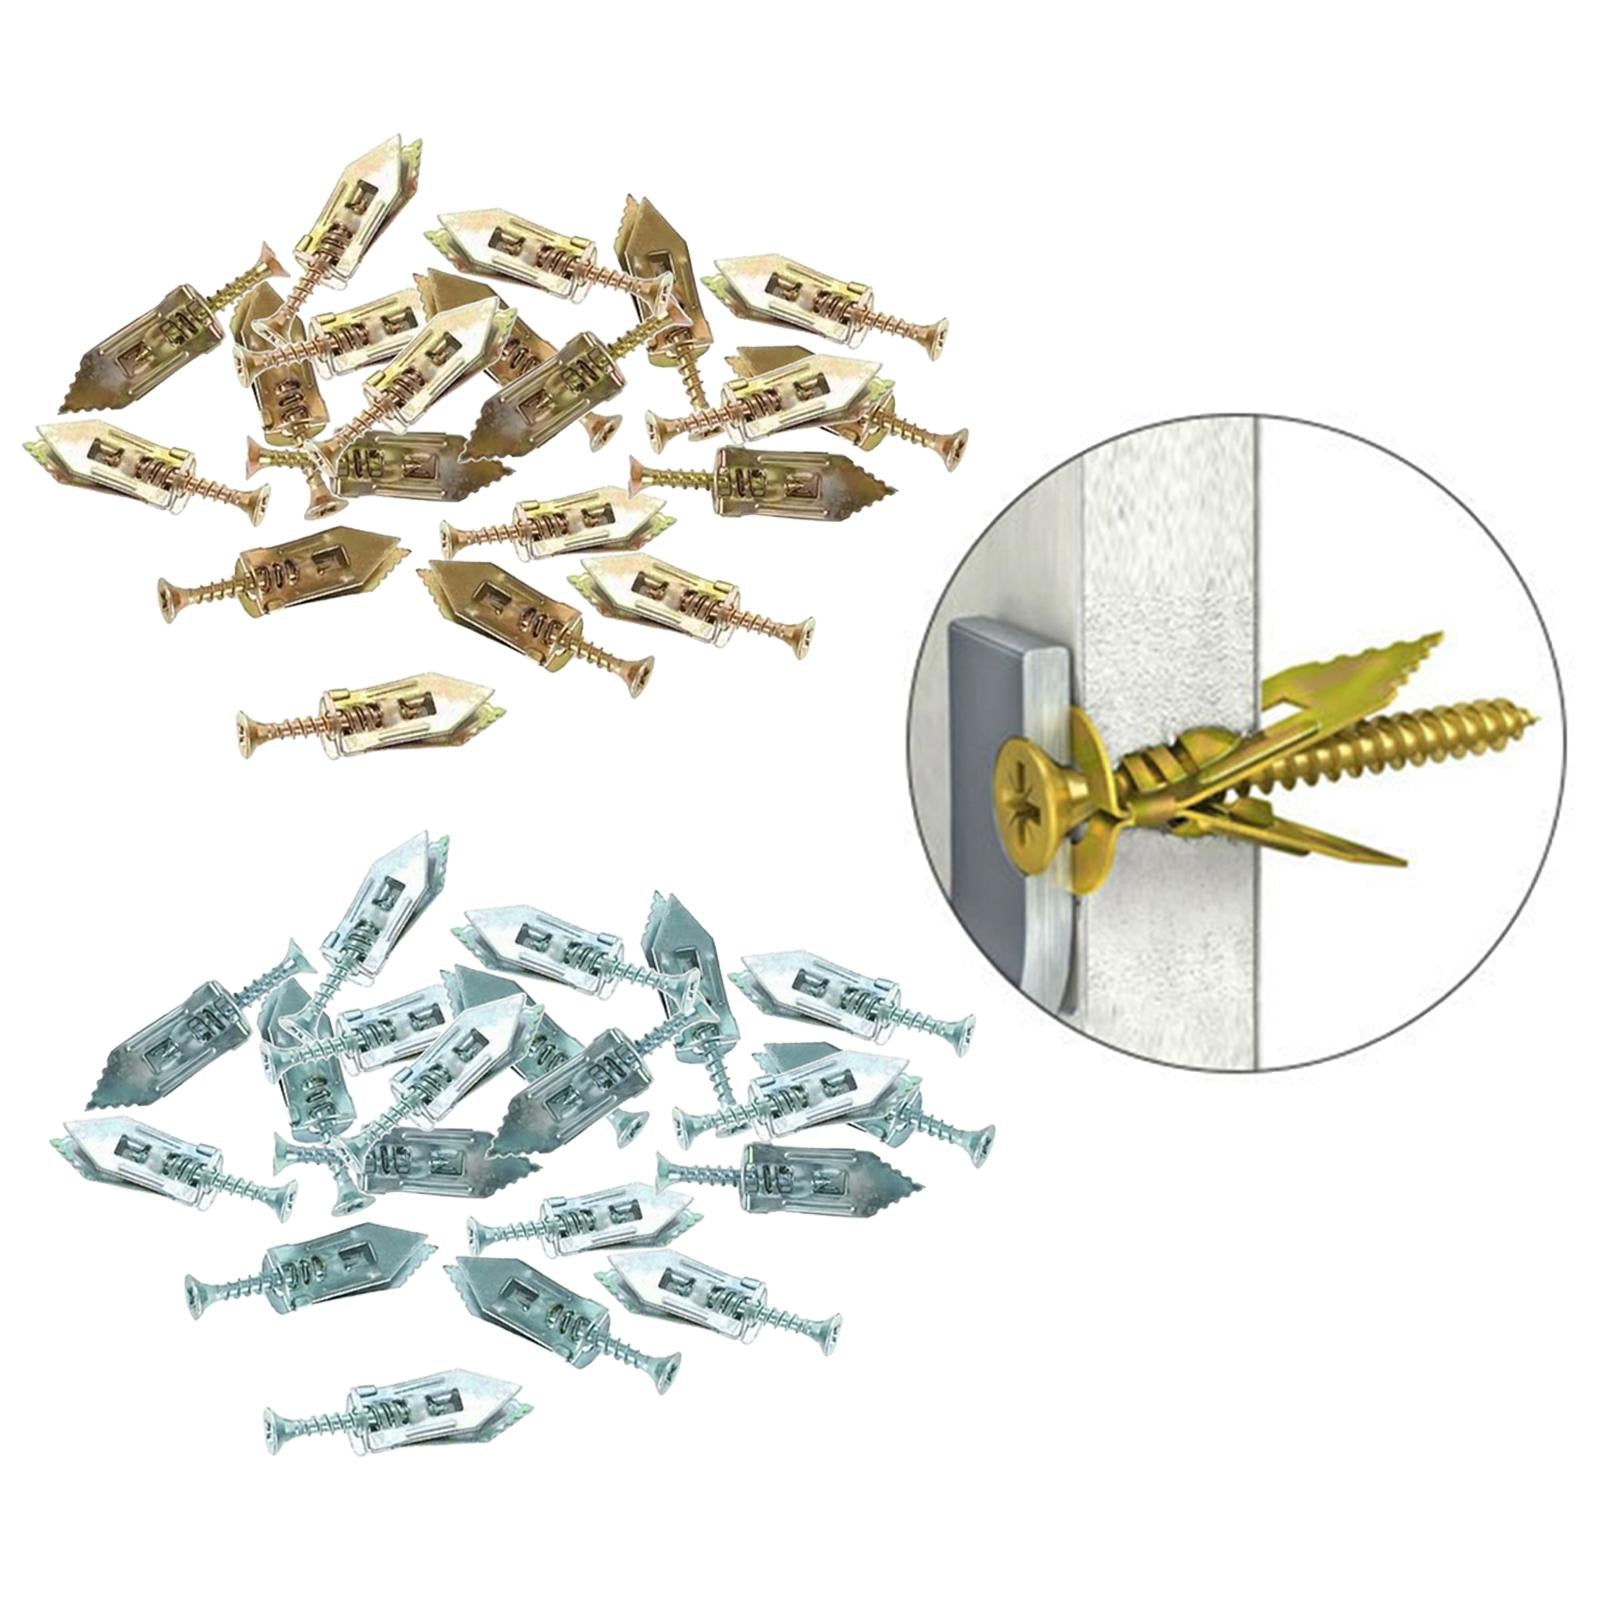 20x Drywall Self Drilling Anchors Screws Kit Easy Application for TV Bike 12x30mm 20pcs Color